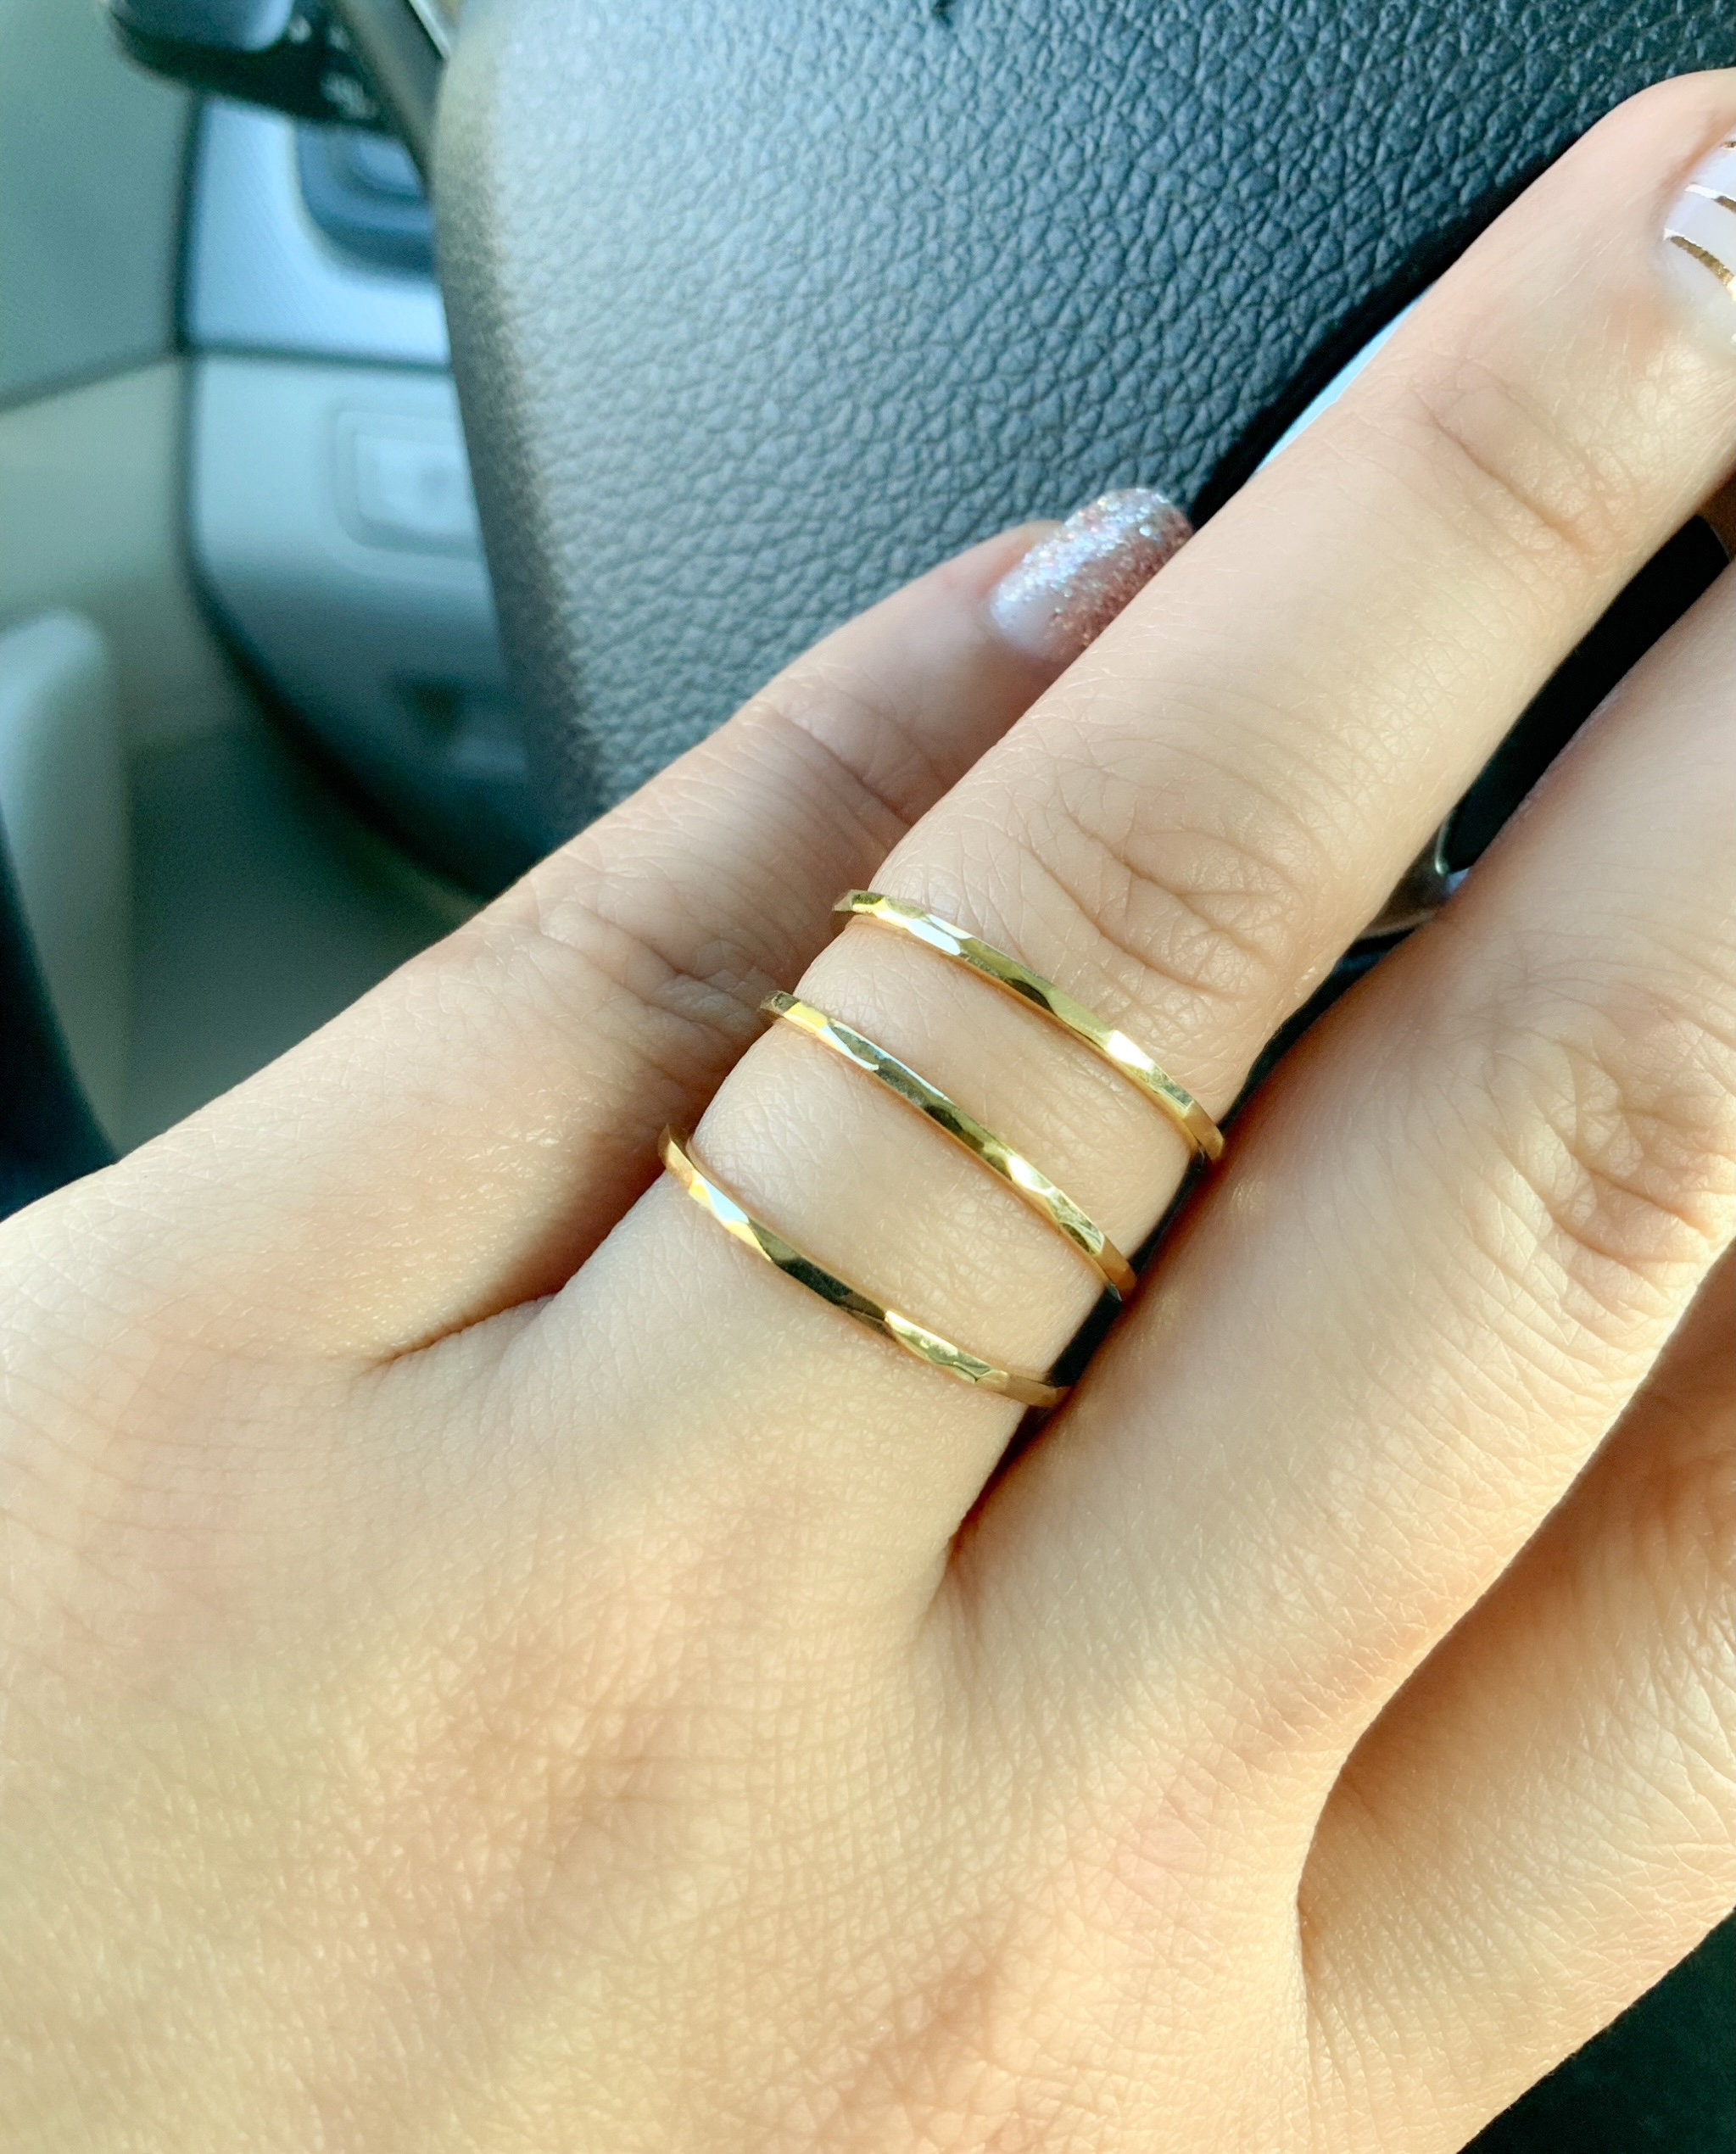 Thin Plain Band SOLID Gold 14K or 18K/ Handmade Faceted Stack Ring/ 1.5mm  Hammered Knuckle, Pinky or Thumb Ring/ Shiny Thin Semanario Rings 